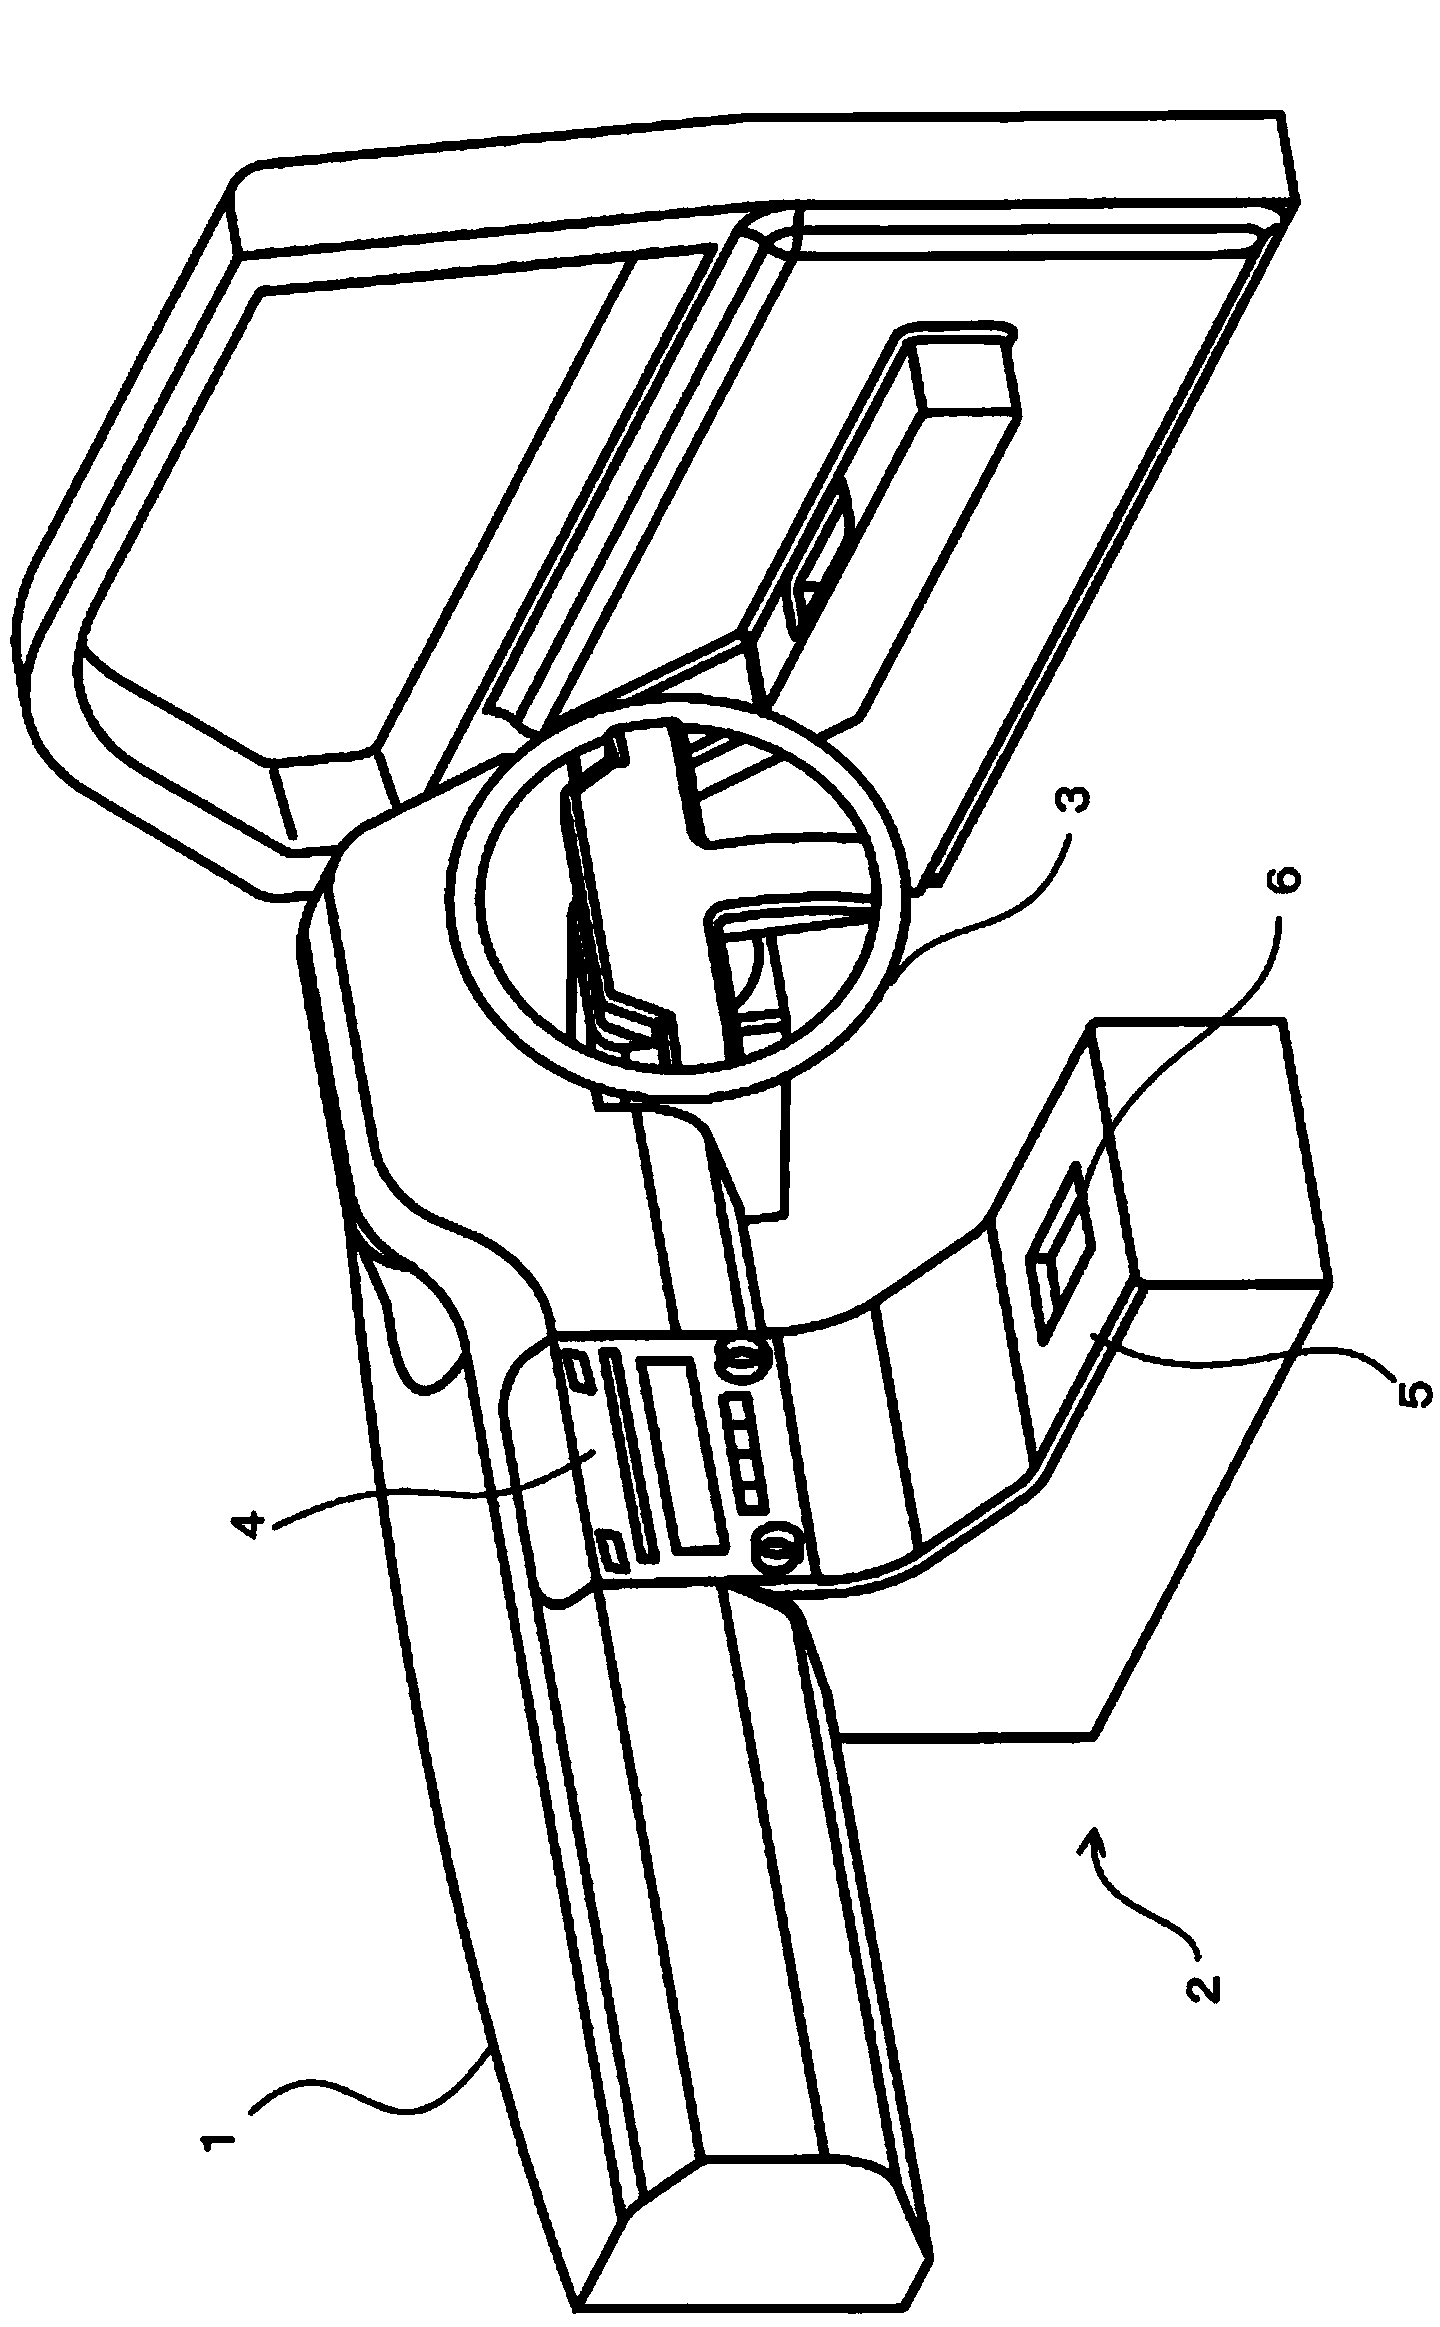 Vehicle-mounted charger